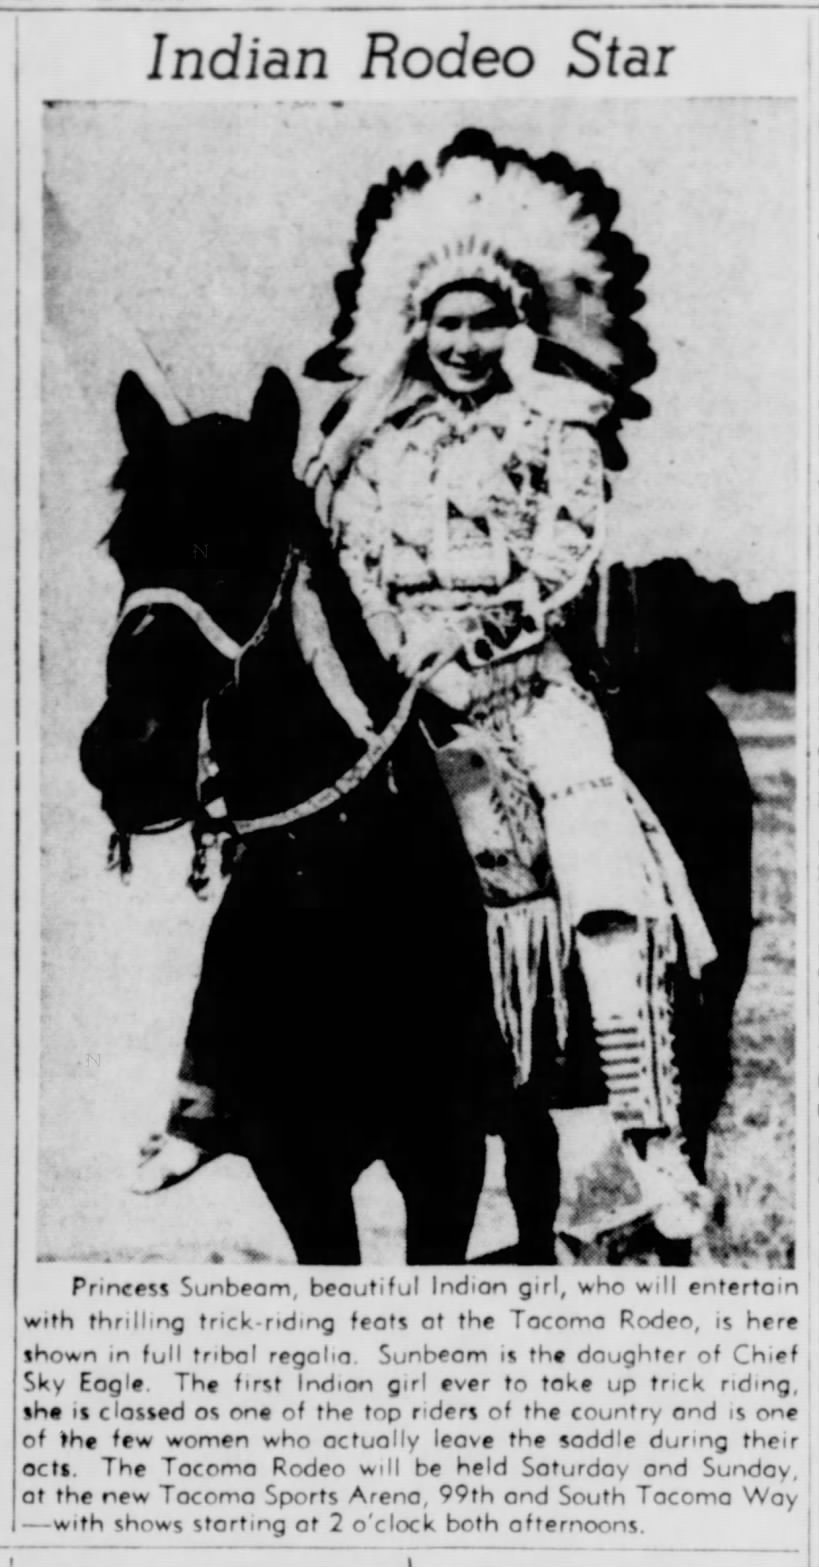 Princess Sunbeam, daughter of Chief Sky Eagle, at the Tacoma Rodeo.